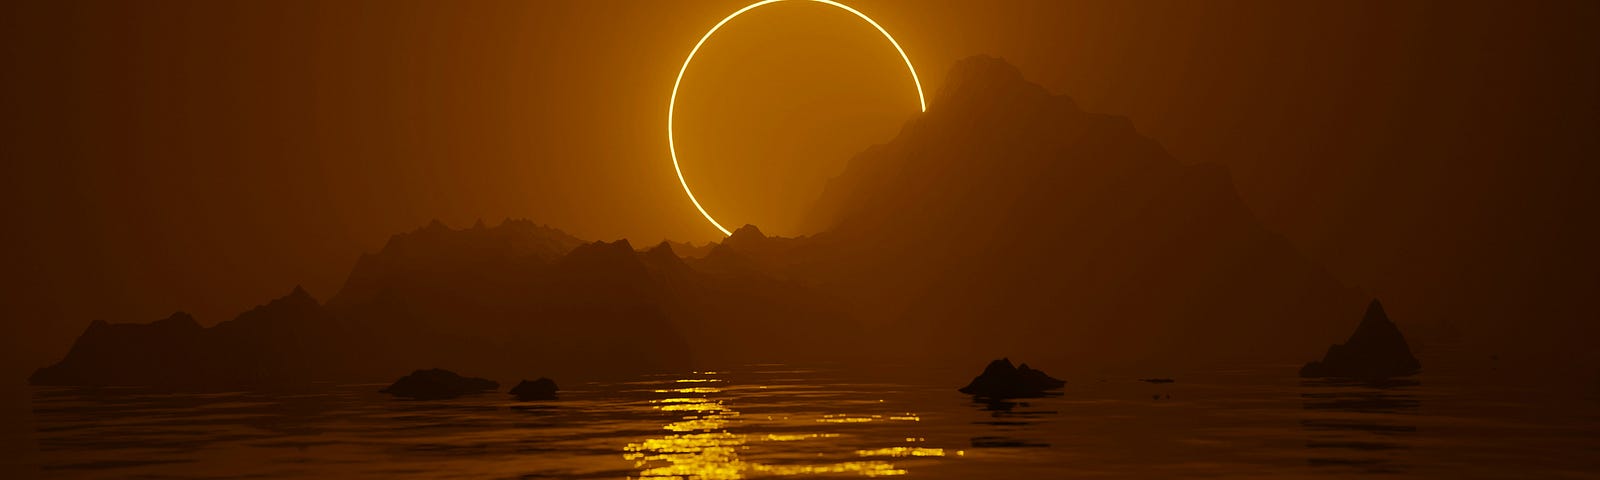 an eerie image of an eclipse at sunset with sparkly reflections cast across the water